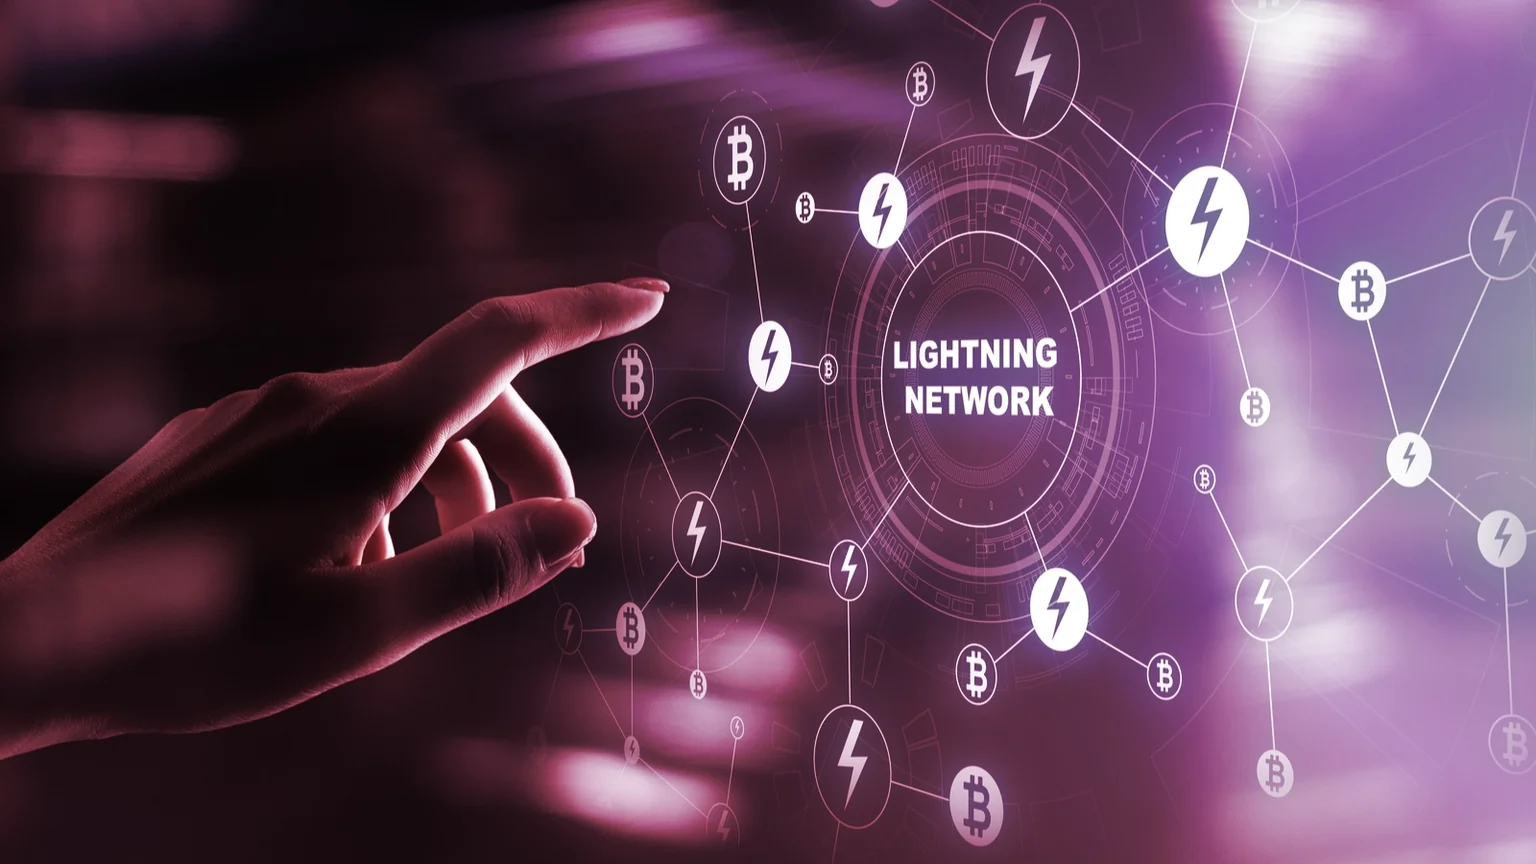 The Lightning Network is a “second-layer solution” built on top of the Bitcoin network that allows for faster payments (Image: Shutterstock)